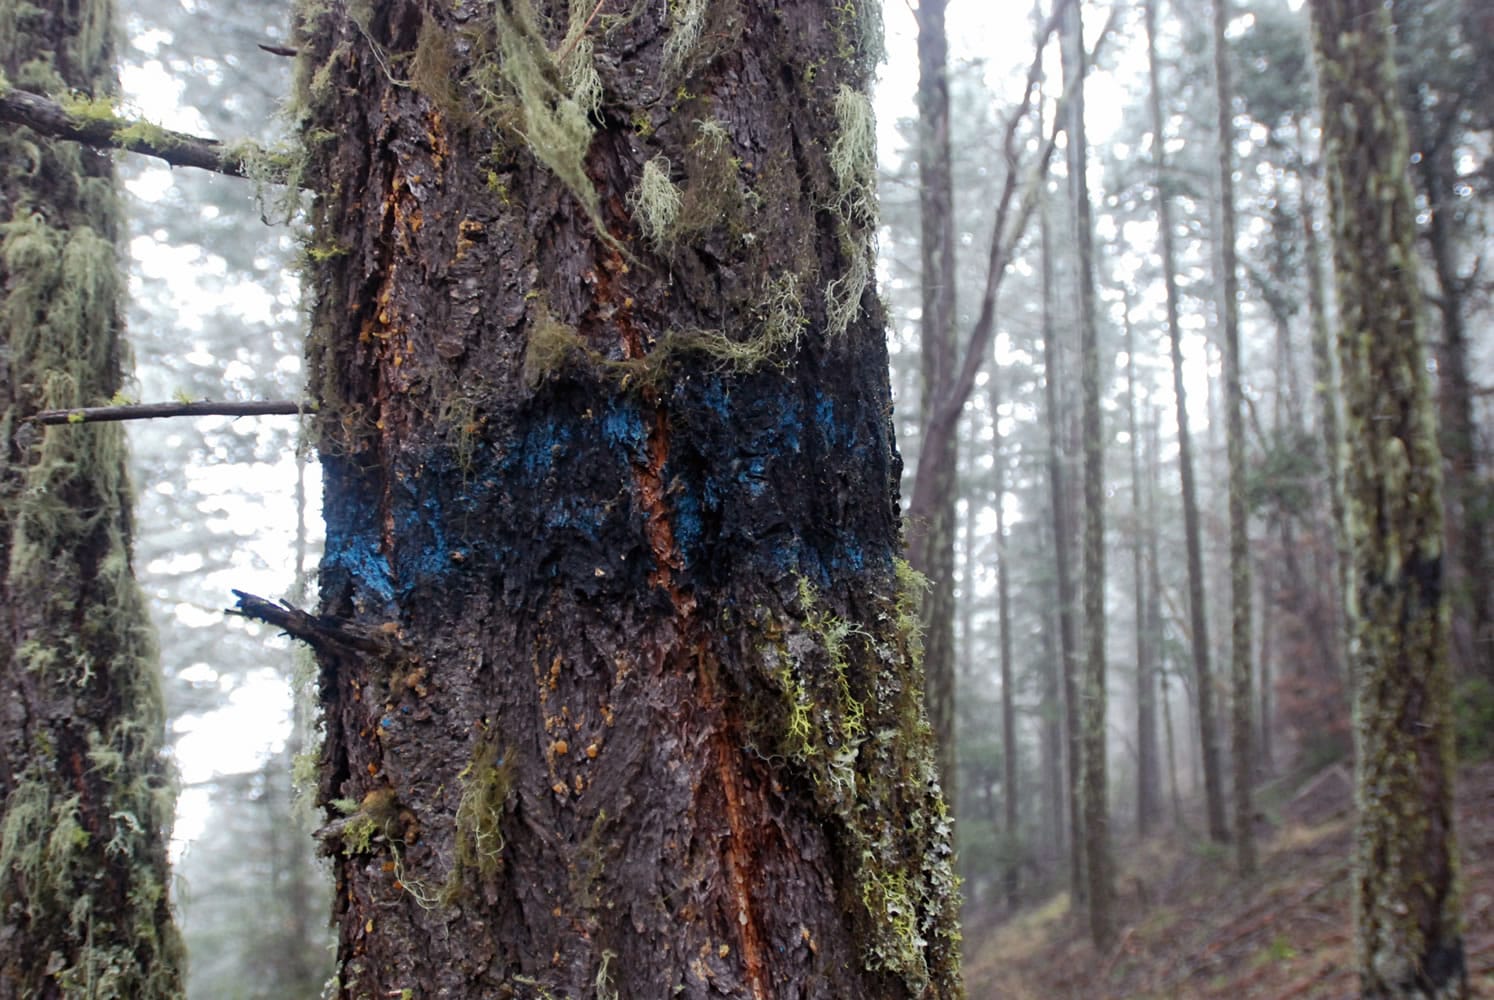 A Douglas fir tree on federal forest land outside Ruch, Ore. The blue paint marking a tree for harvest is leftover from a 2004 timber sale that drew no bids.